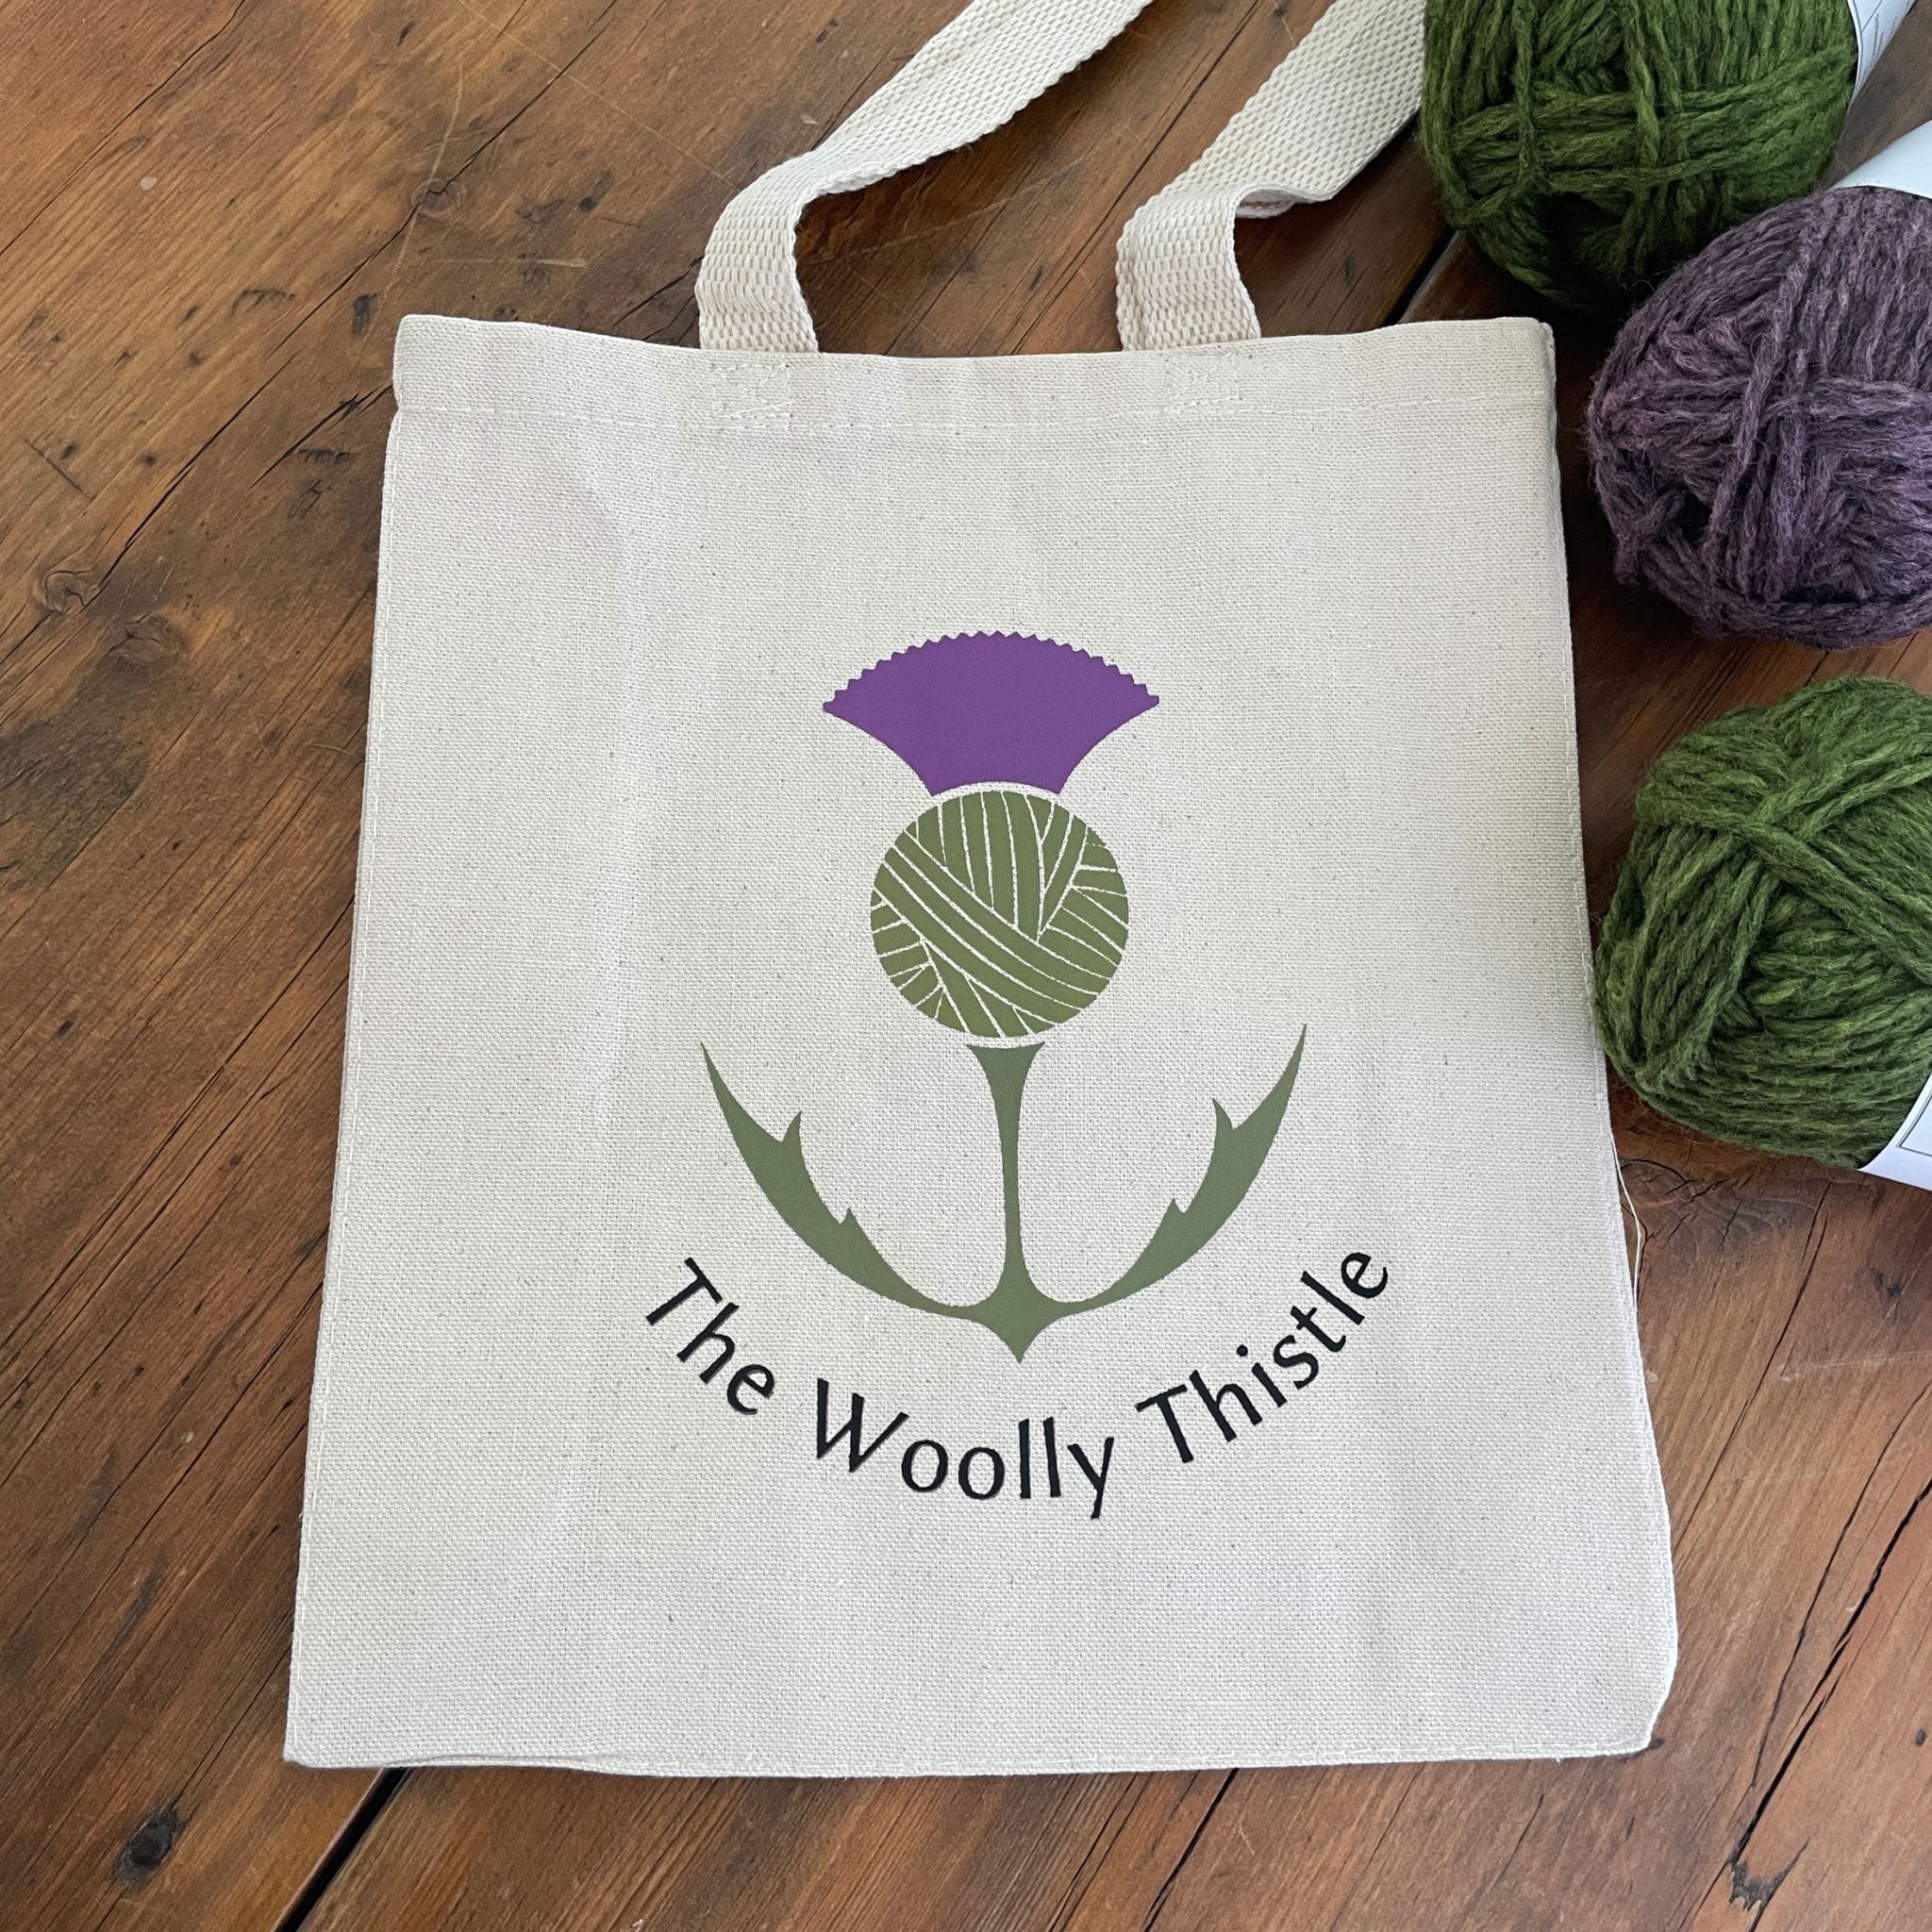 Canvas tote with The Woolly Thistle color logo.  Small size tote with green and purple yarn in background.